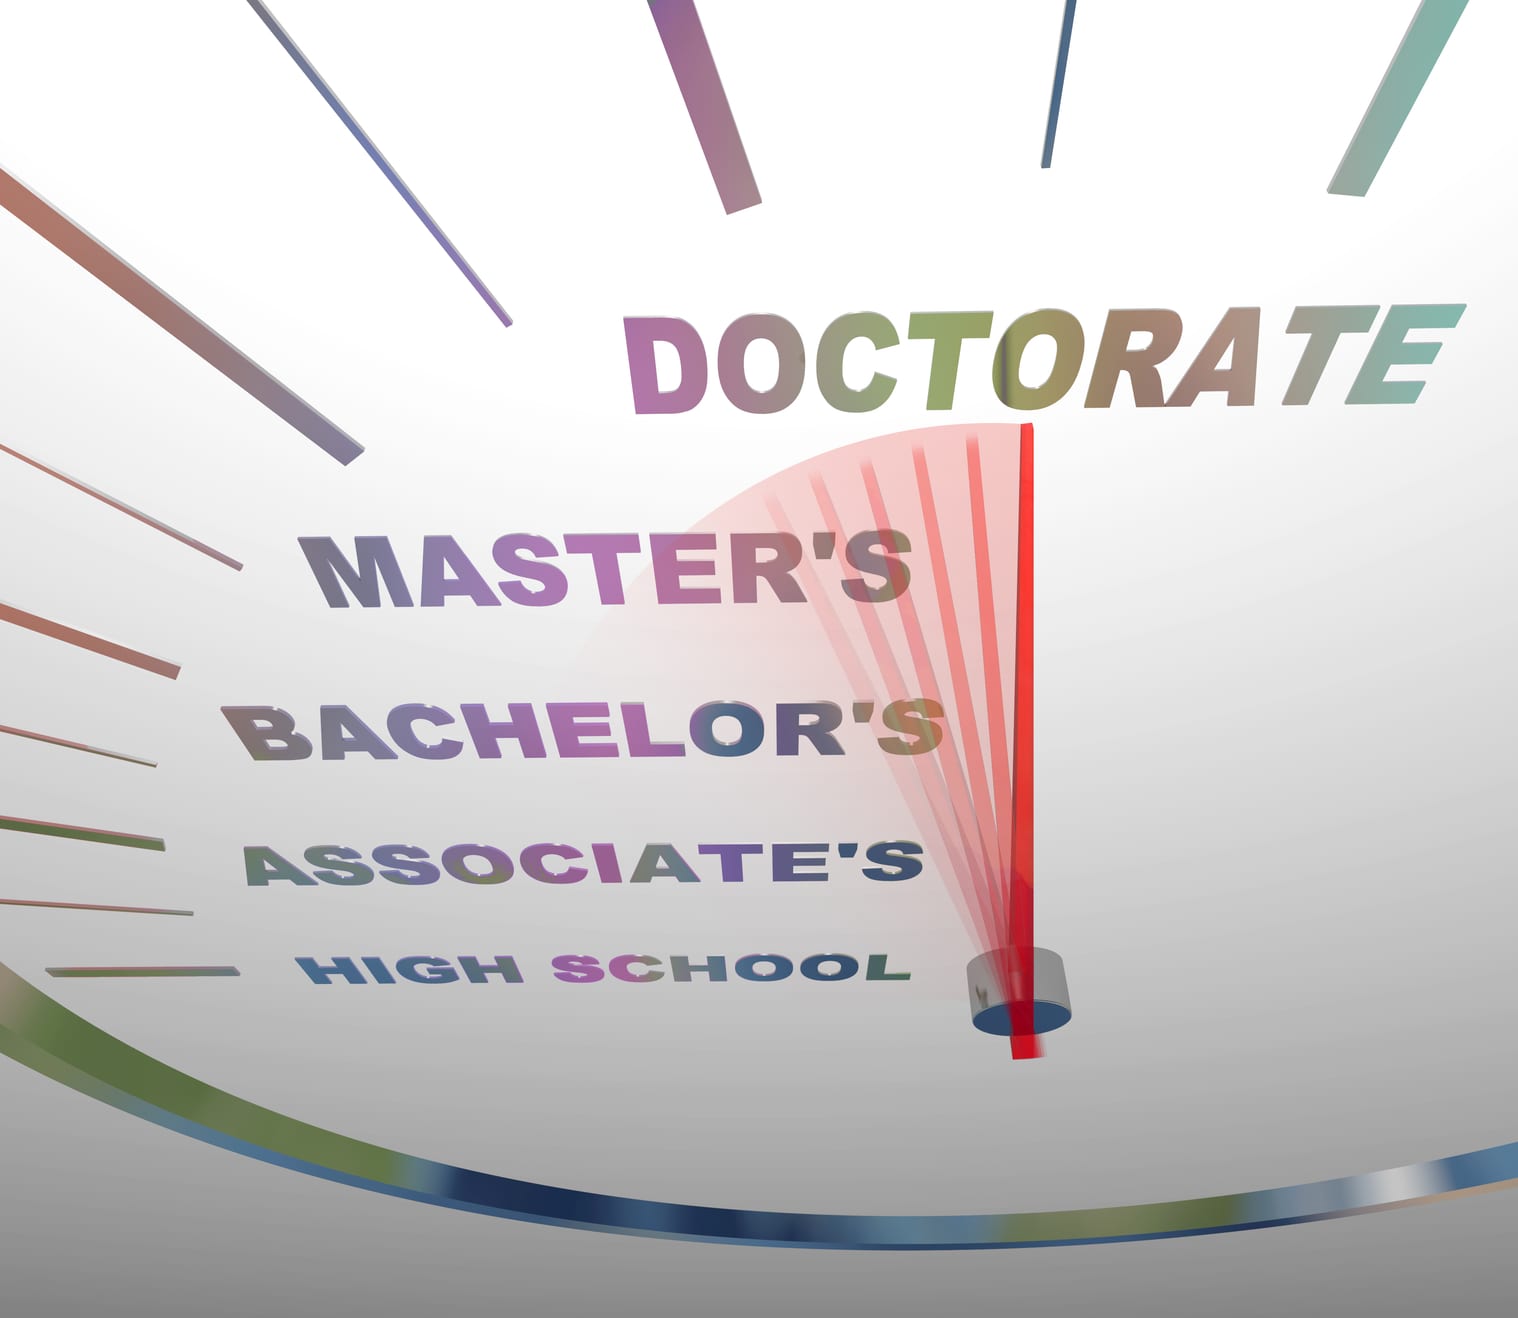 Easiest PhD and Shortest Doctoral Programs Online for 